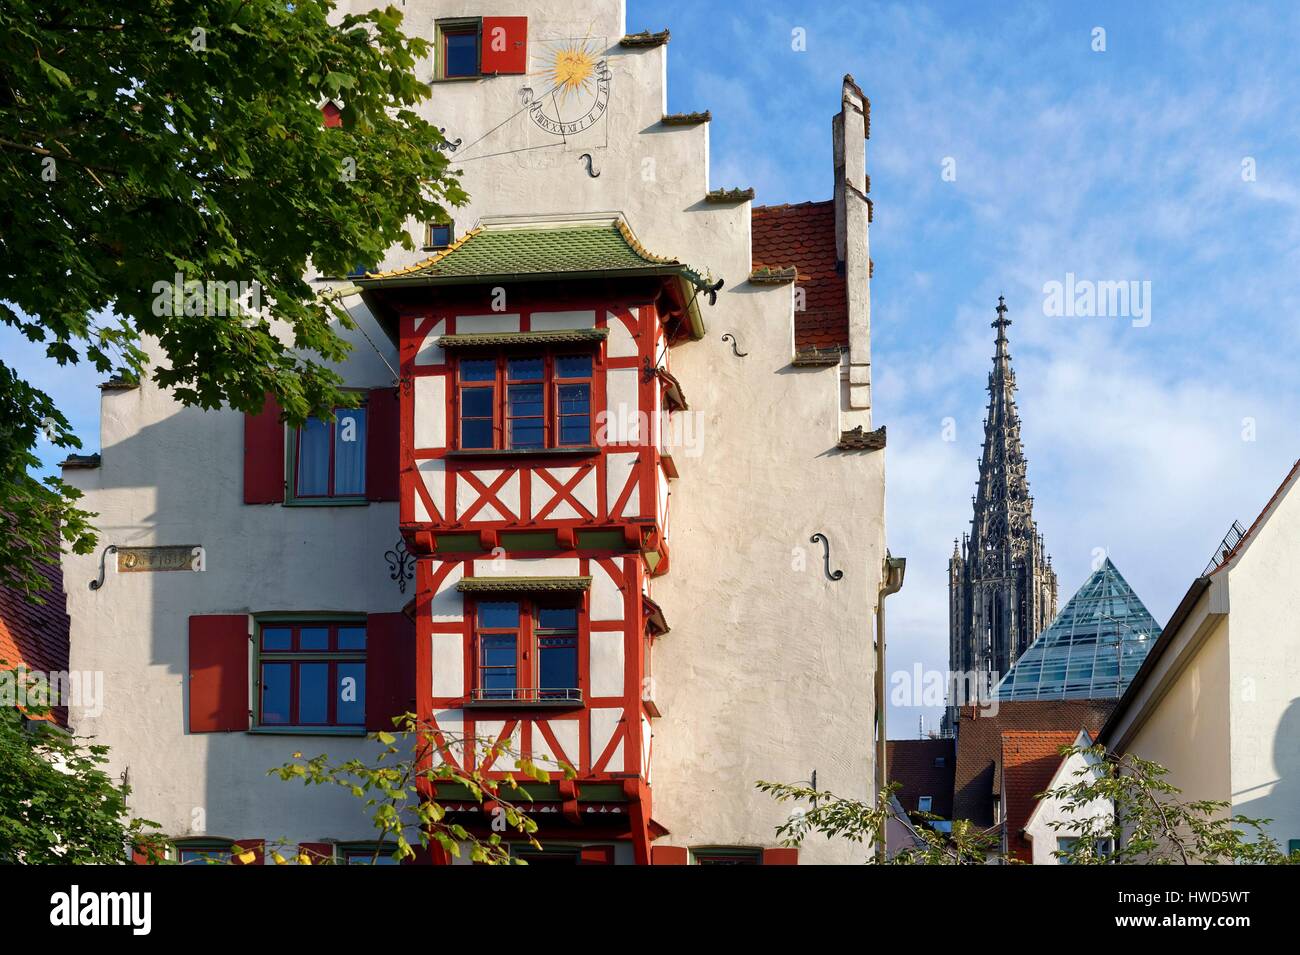 Germany, Bade Wurtemberg, Ulm, Albert Einstein' s birthplace, Fischerviertel, fishermen and tanners district and Lutheran Cathedral (Munster), the tallest church in the world with a steeple measuring 161m (530 ft) Stock Photo